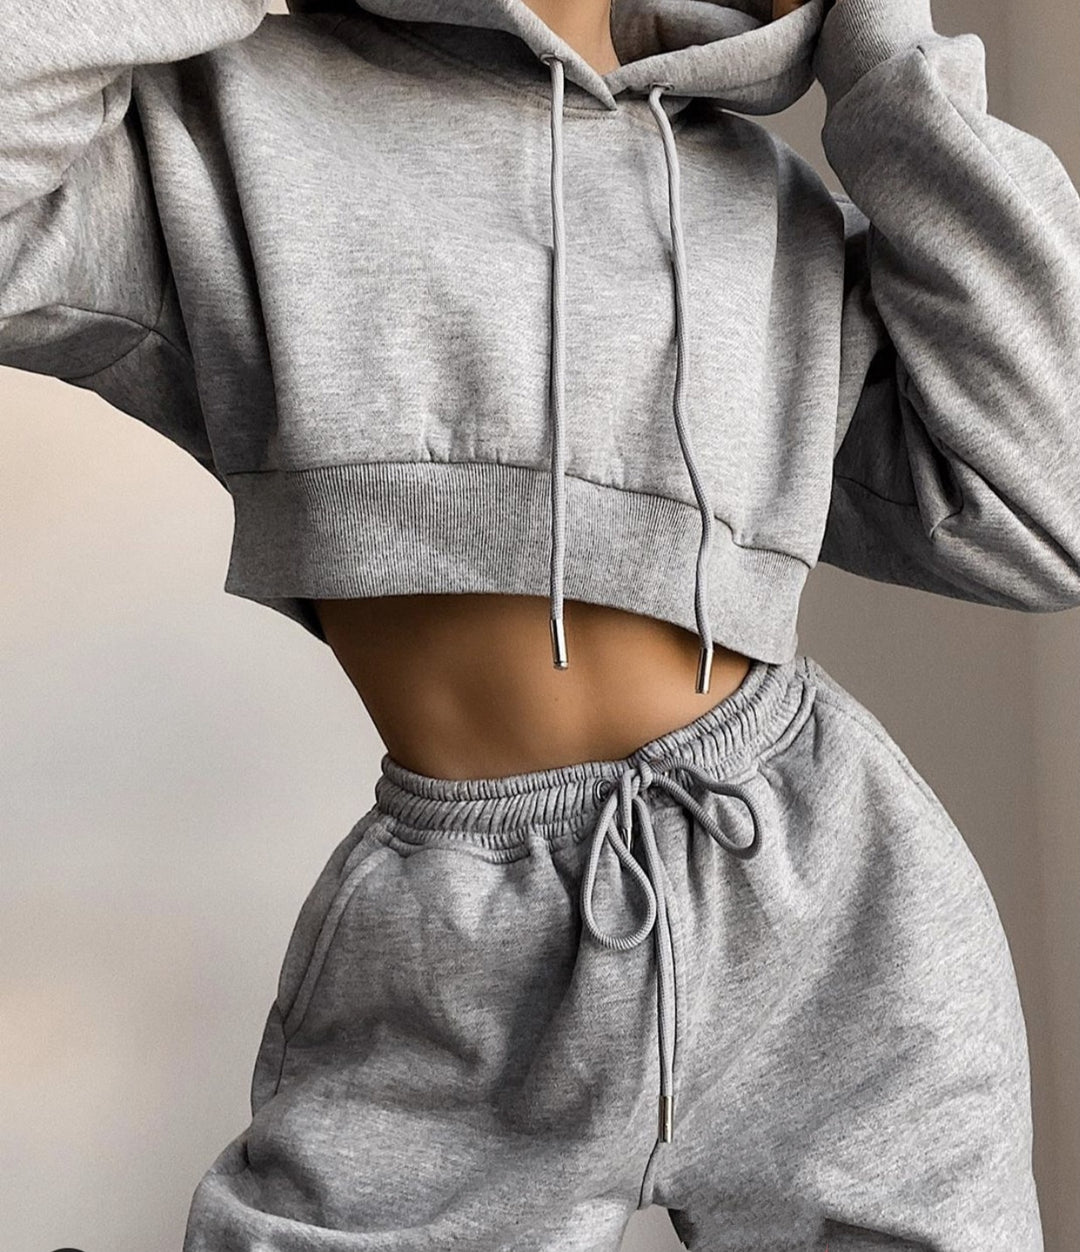 Women Winter Fashion Outfits Tracksuit Hoodies